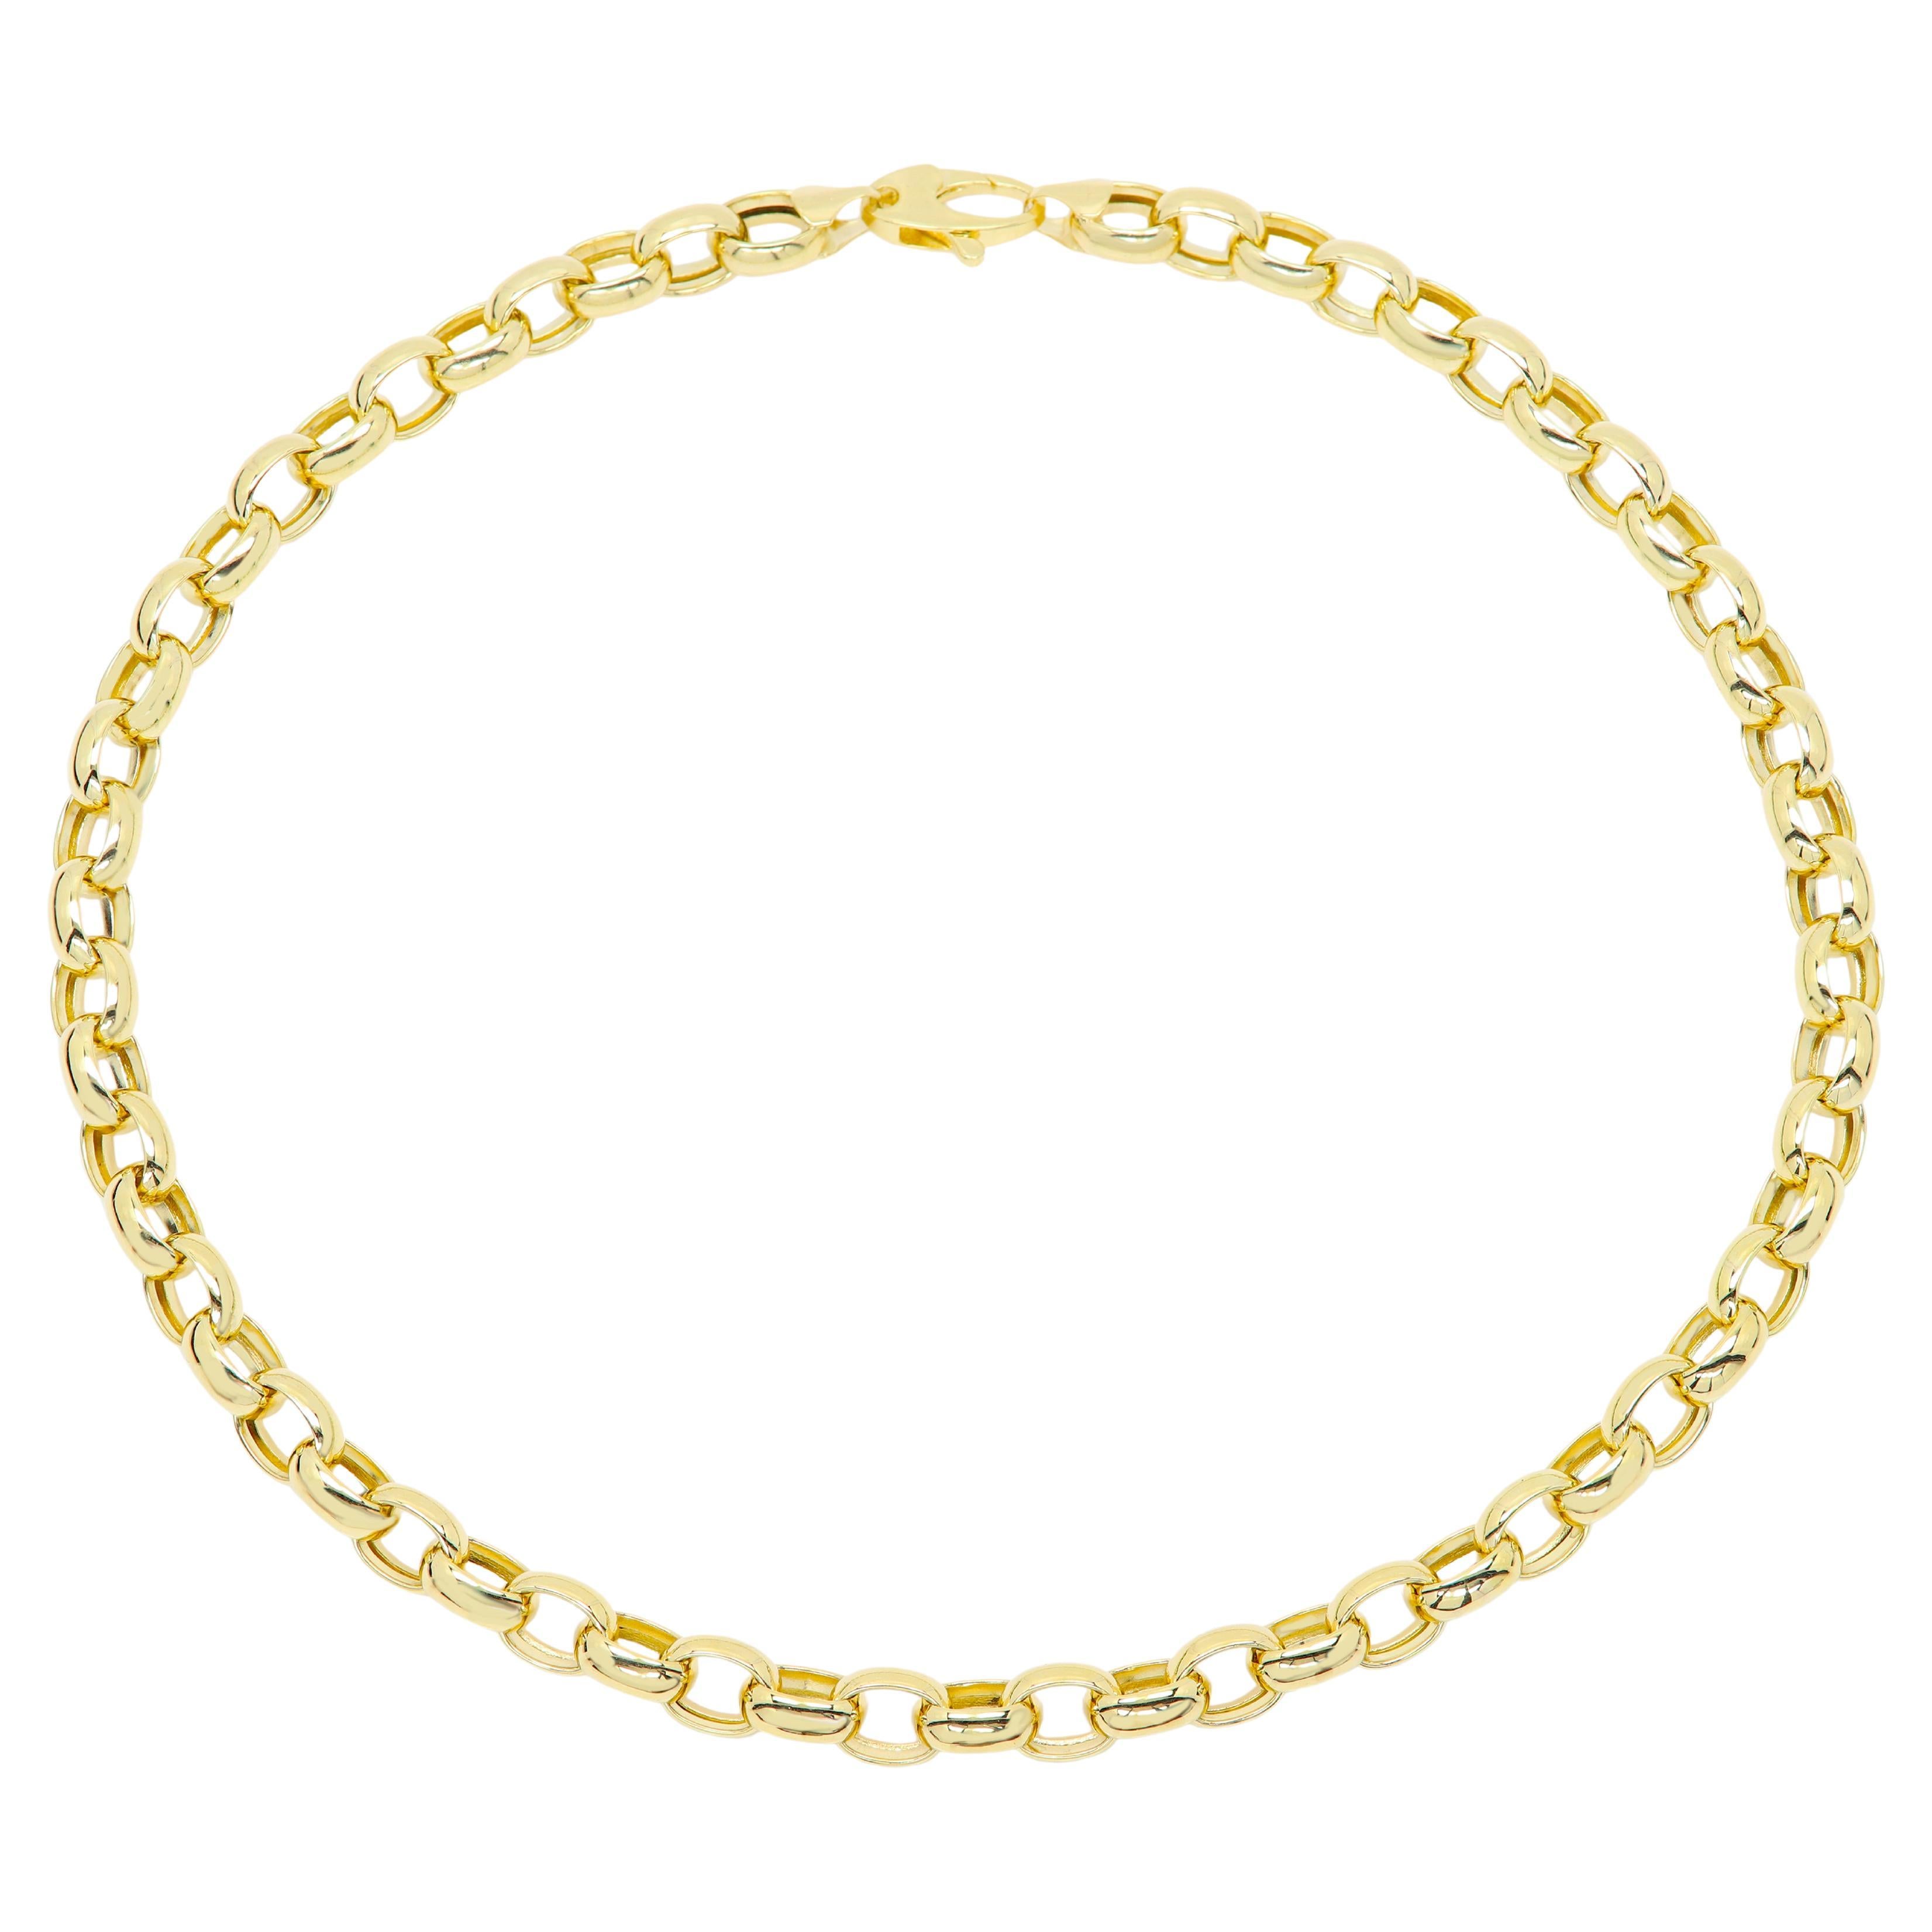 14 Karat Rolo Link Chain Made In Italy 14k yellow Gold 16' inch Rolo Style